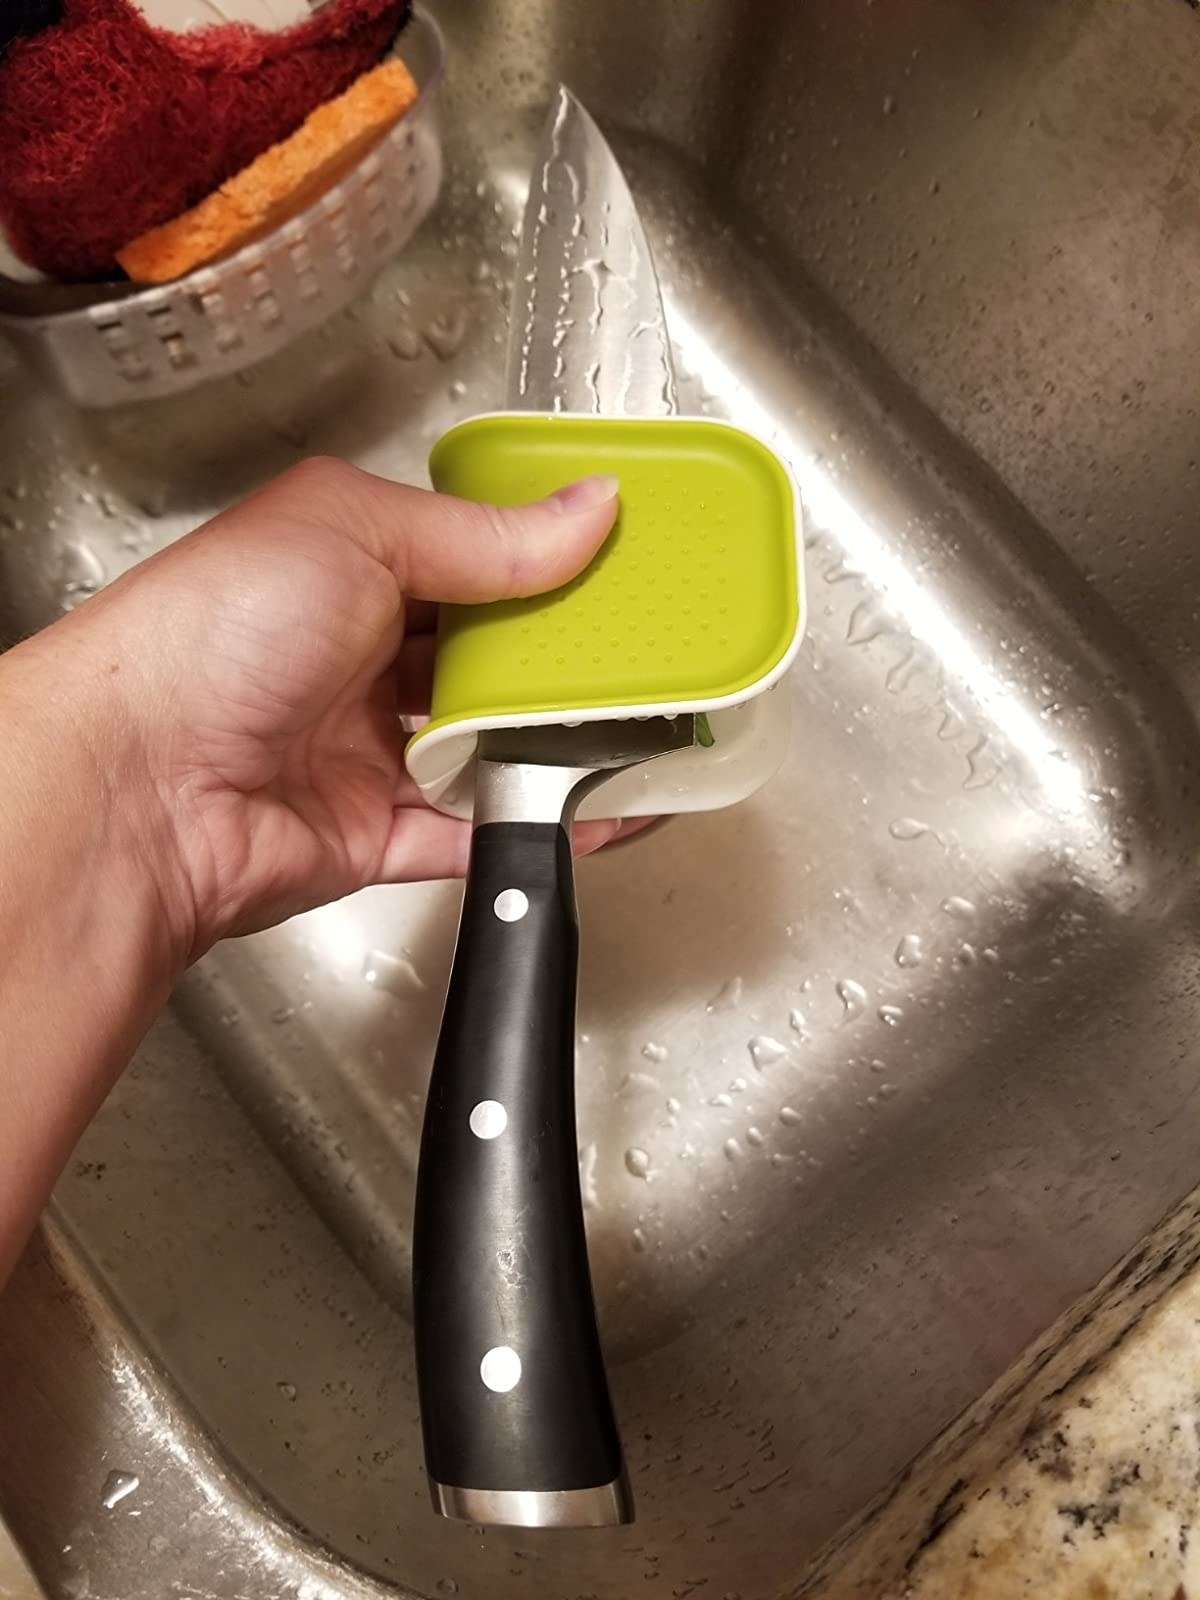 Reviewer using scrubber to clean a knife